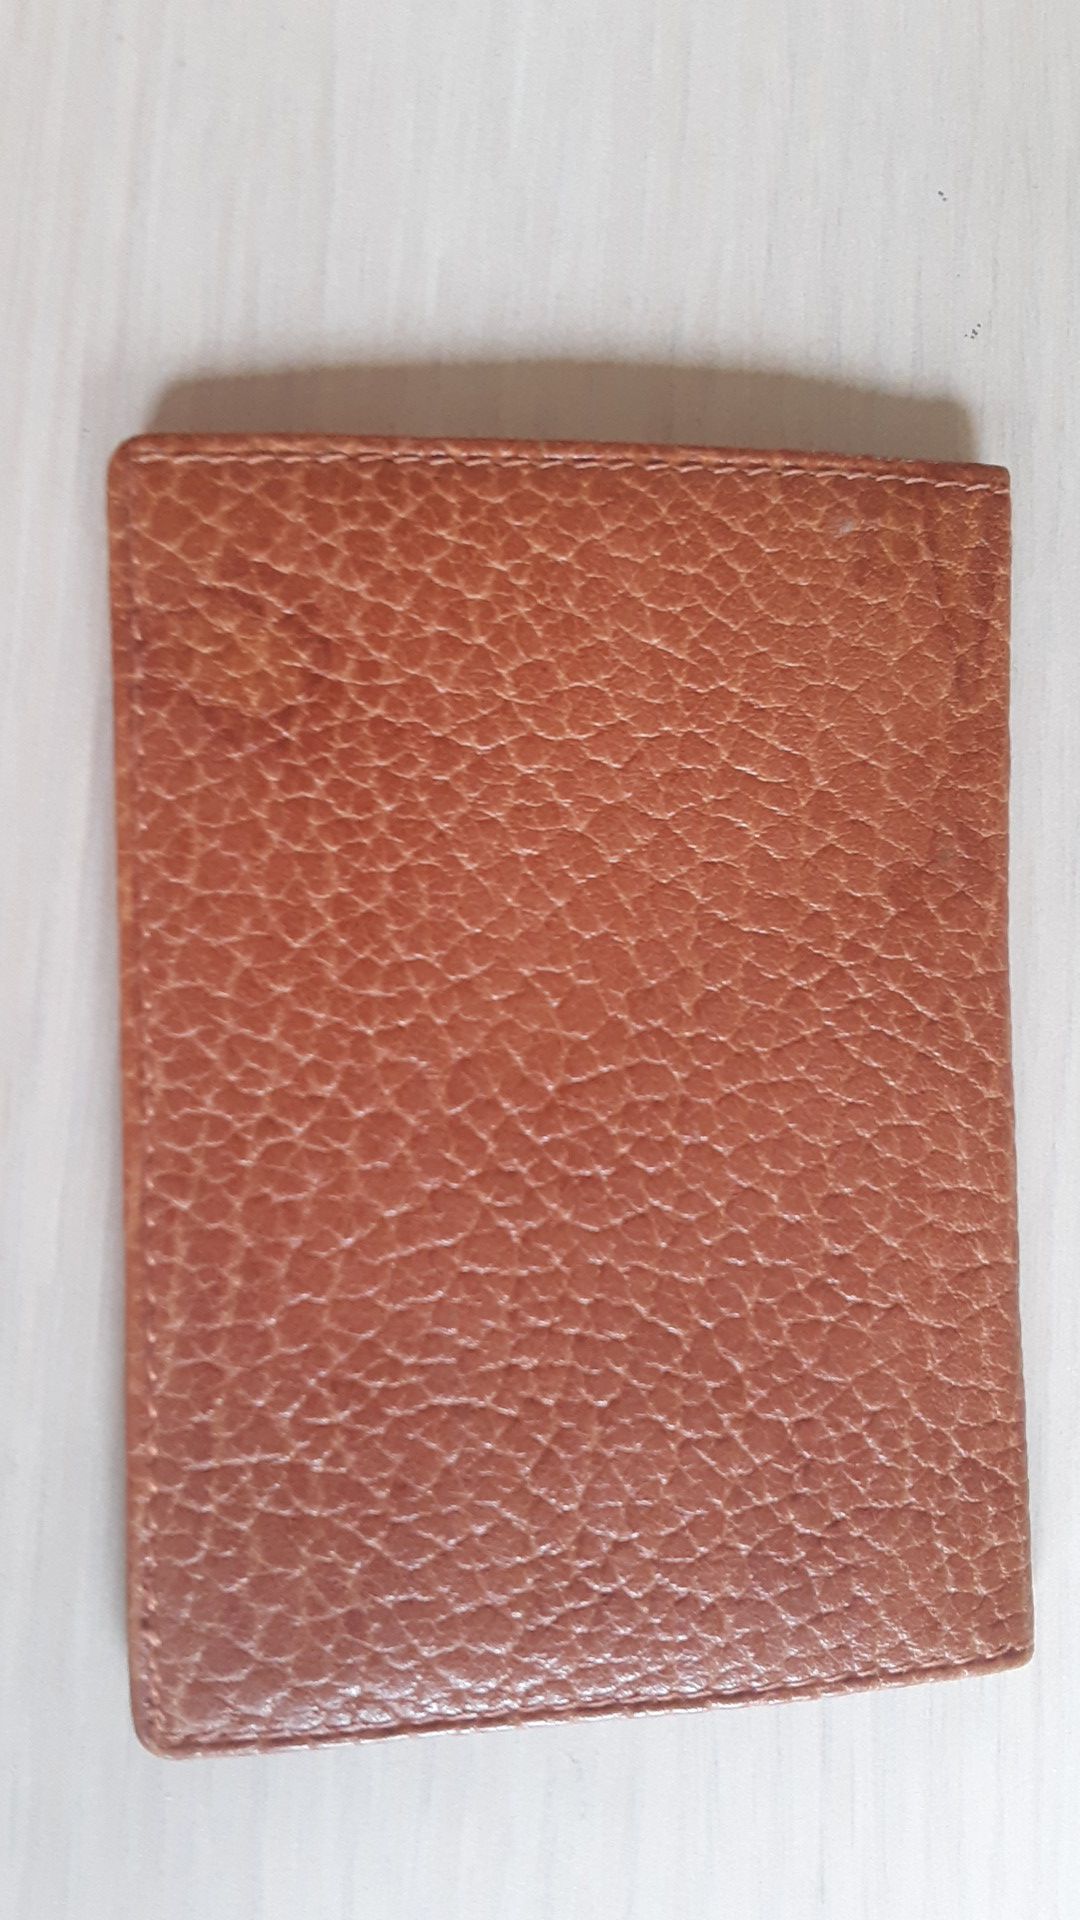 Men's tan leather small wallet, Polo by Ralph Lauren